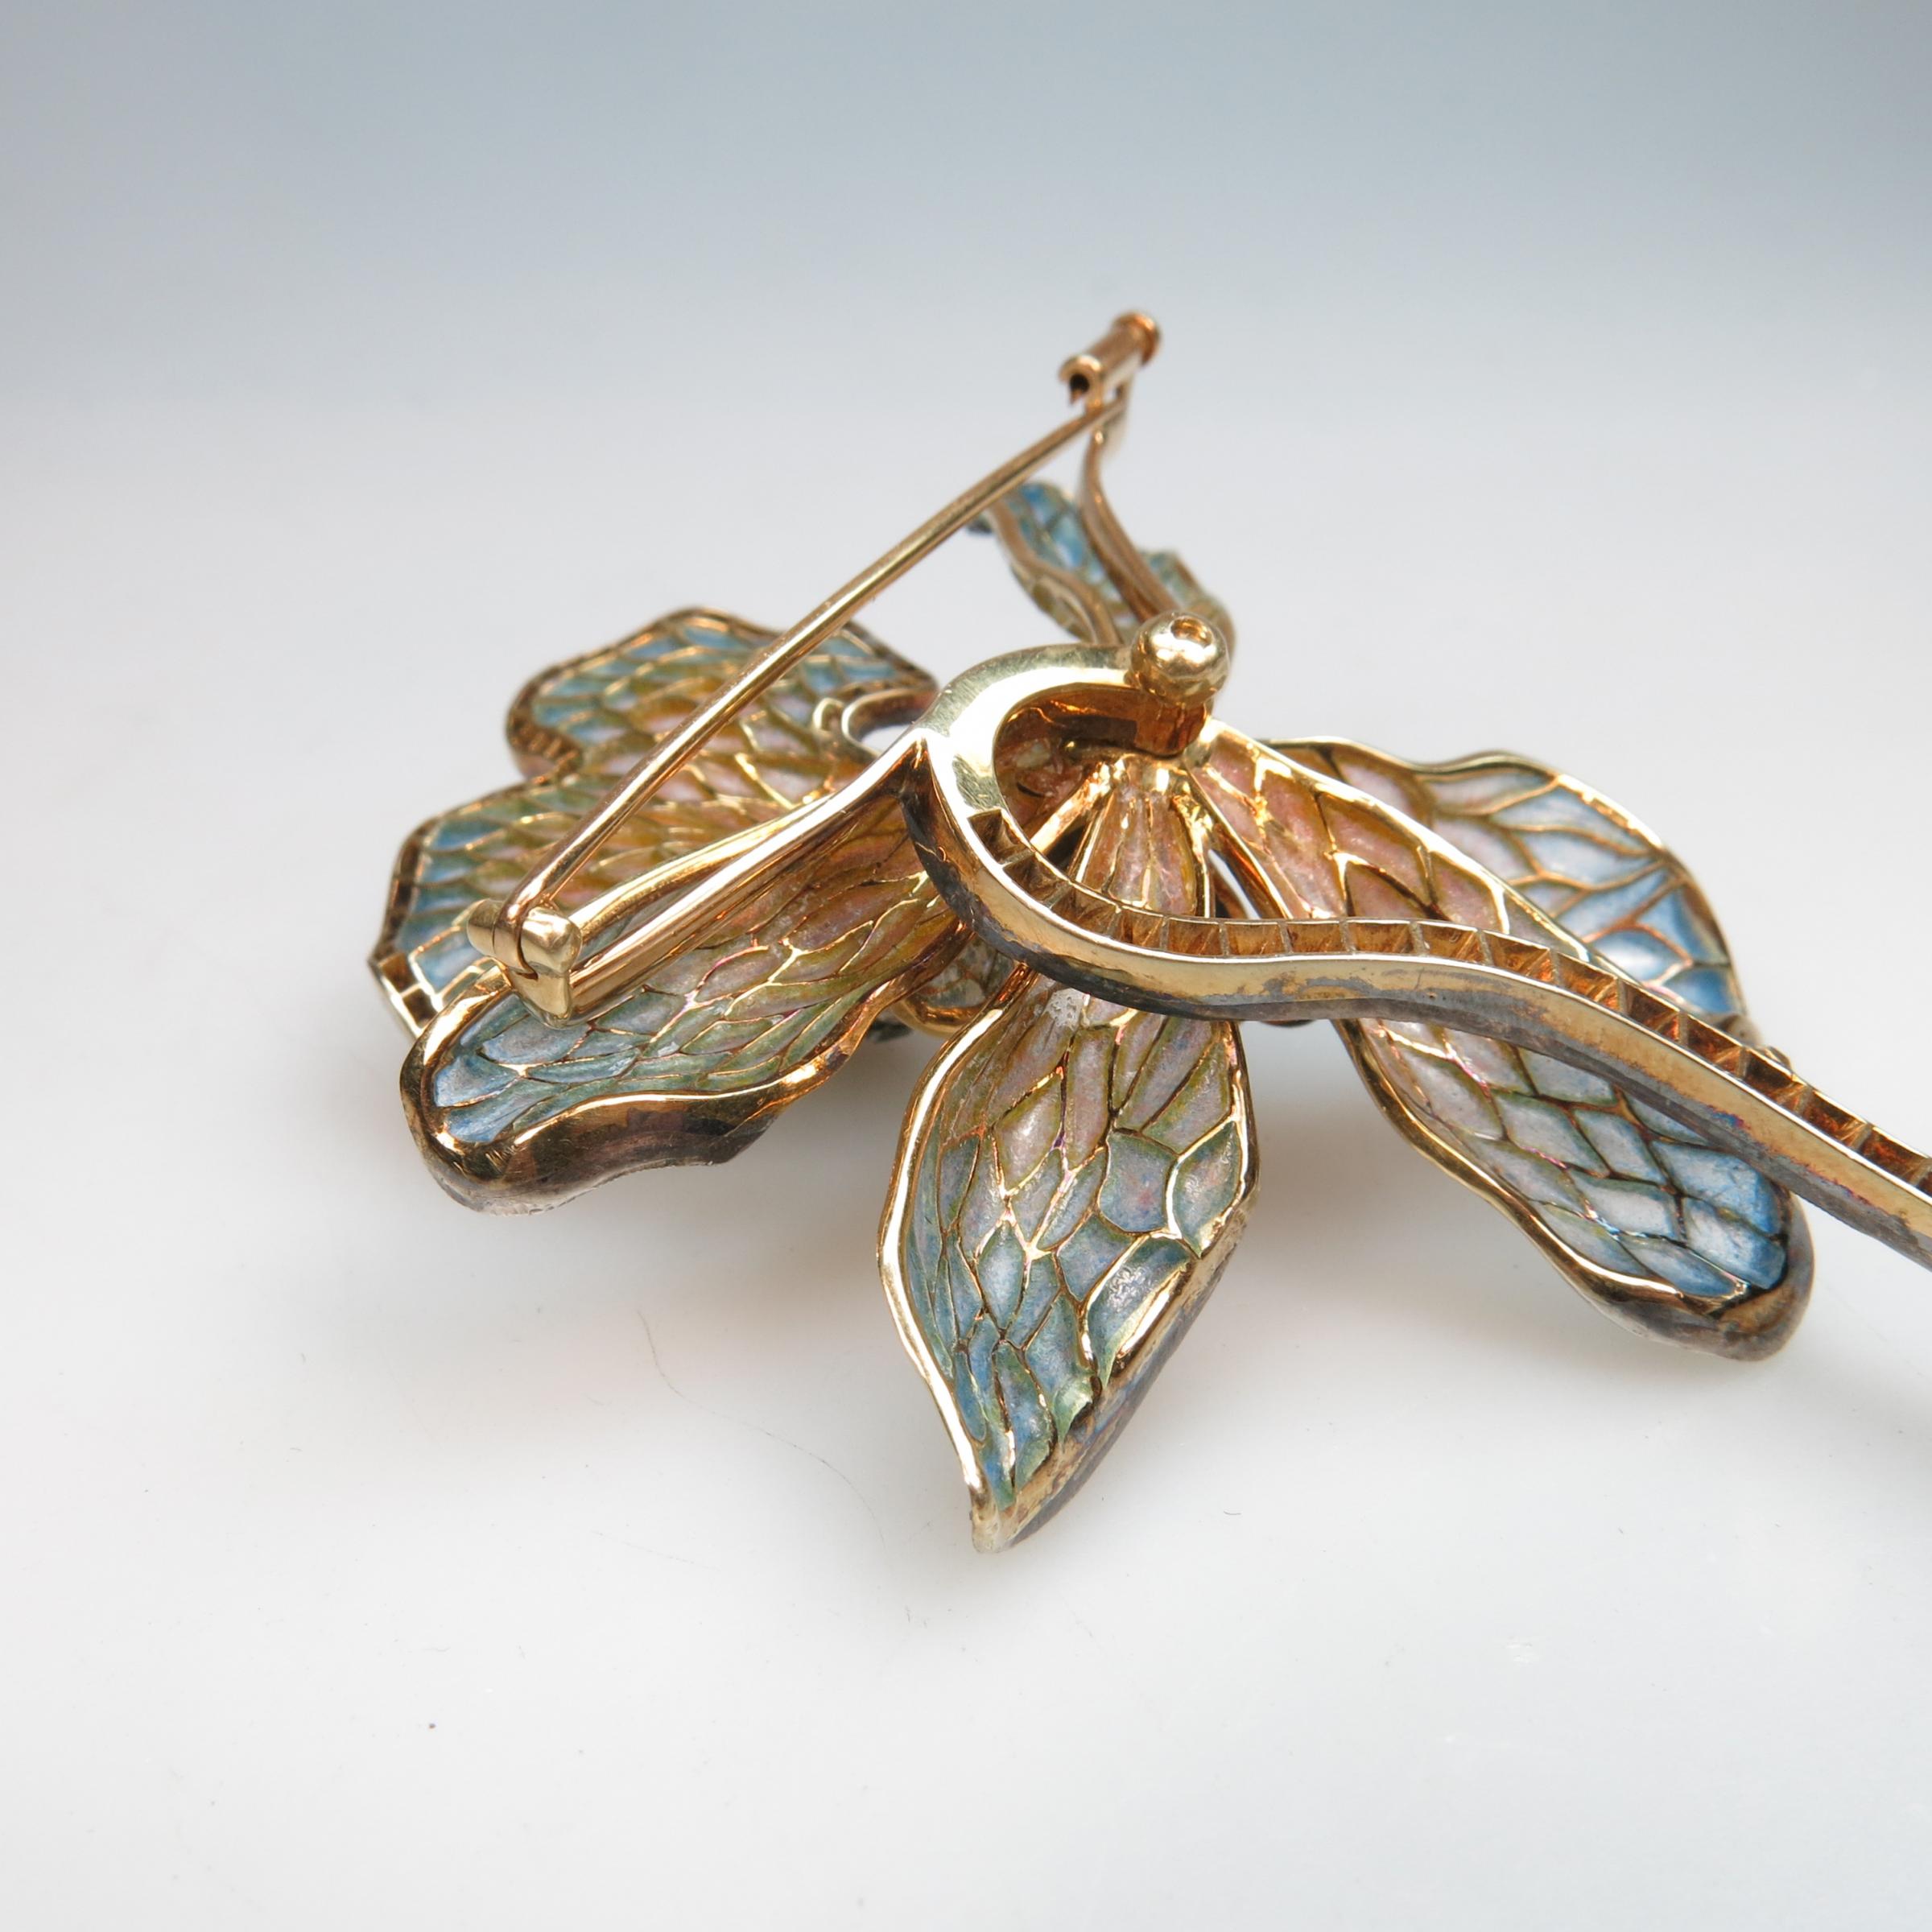 18k Yellow Gold, Silver And Enamel Brooch